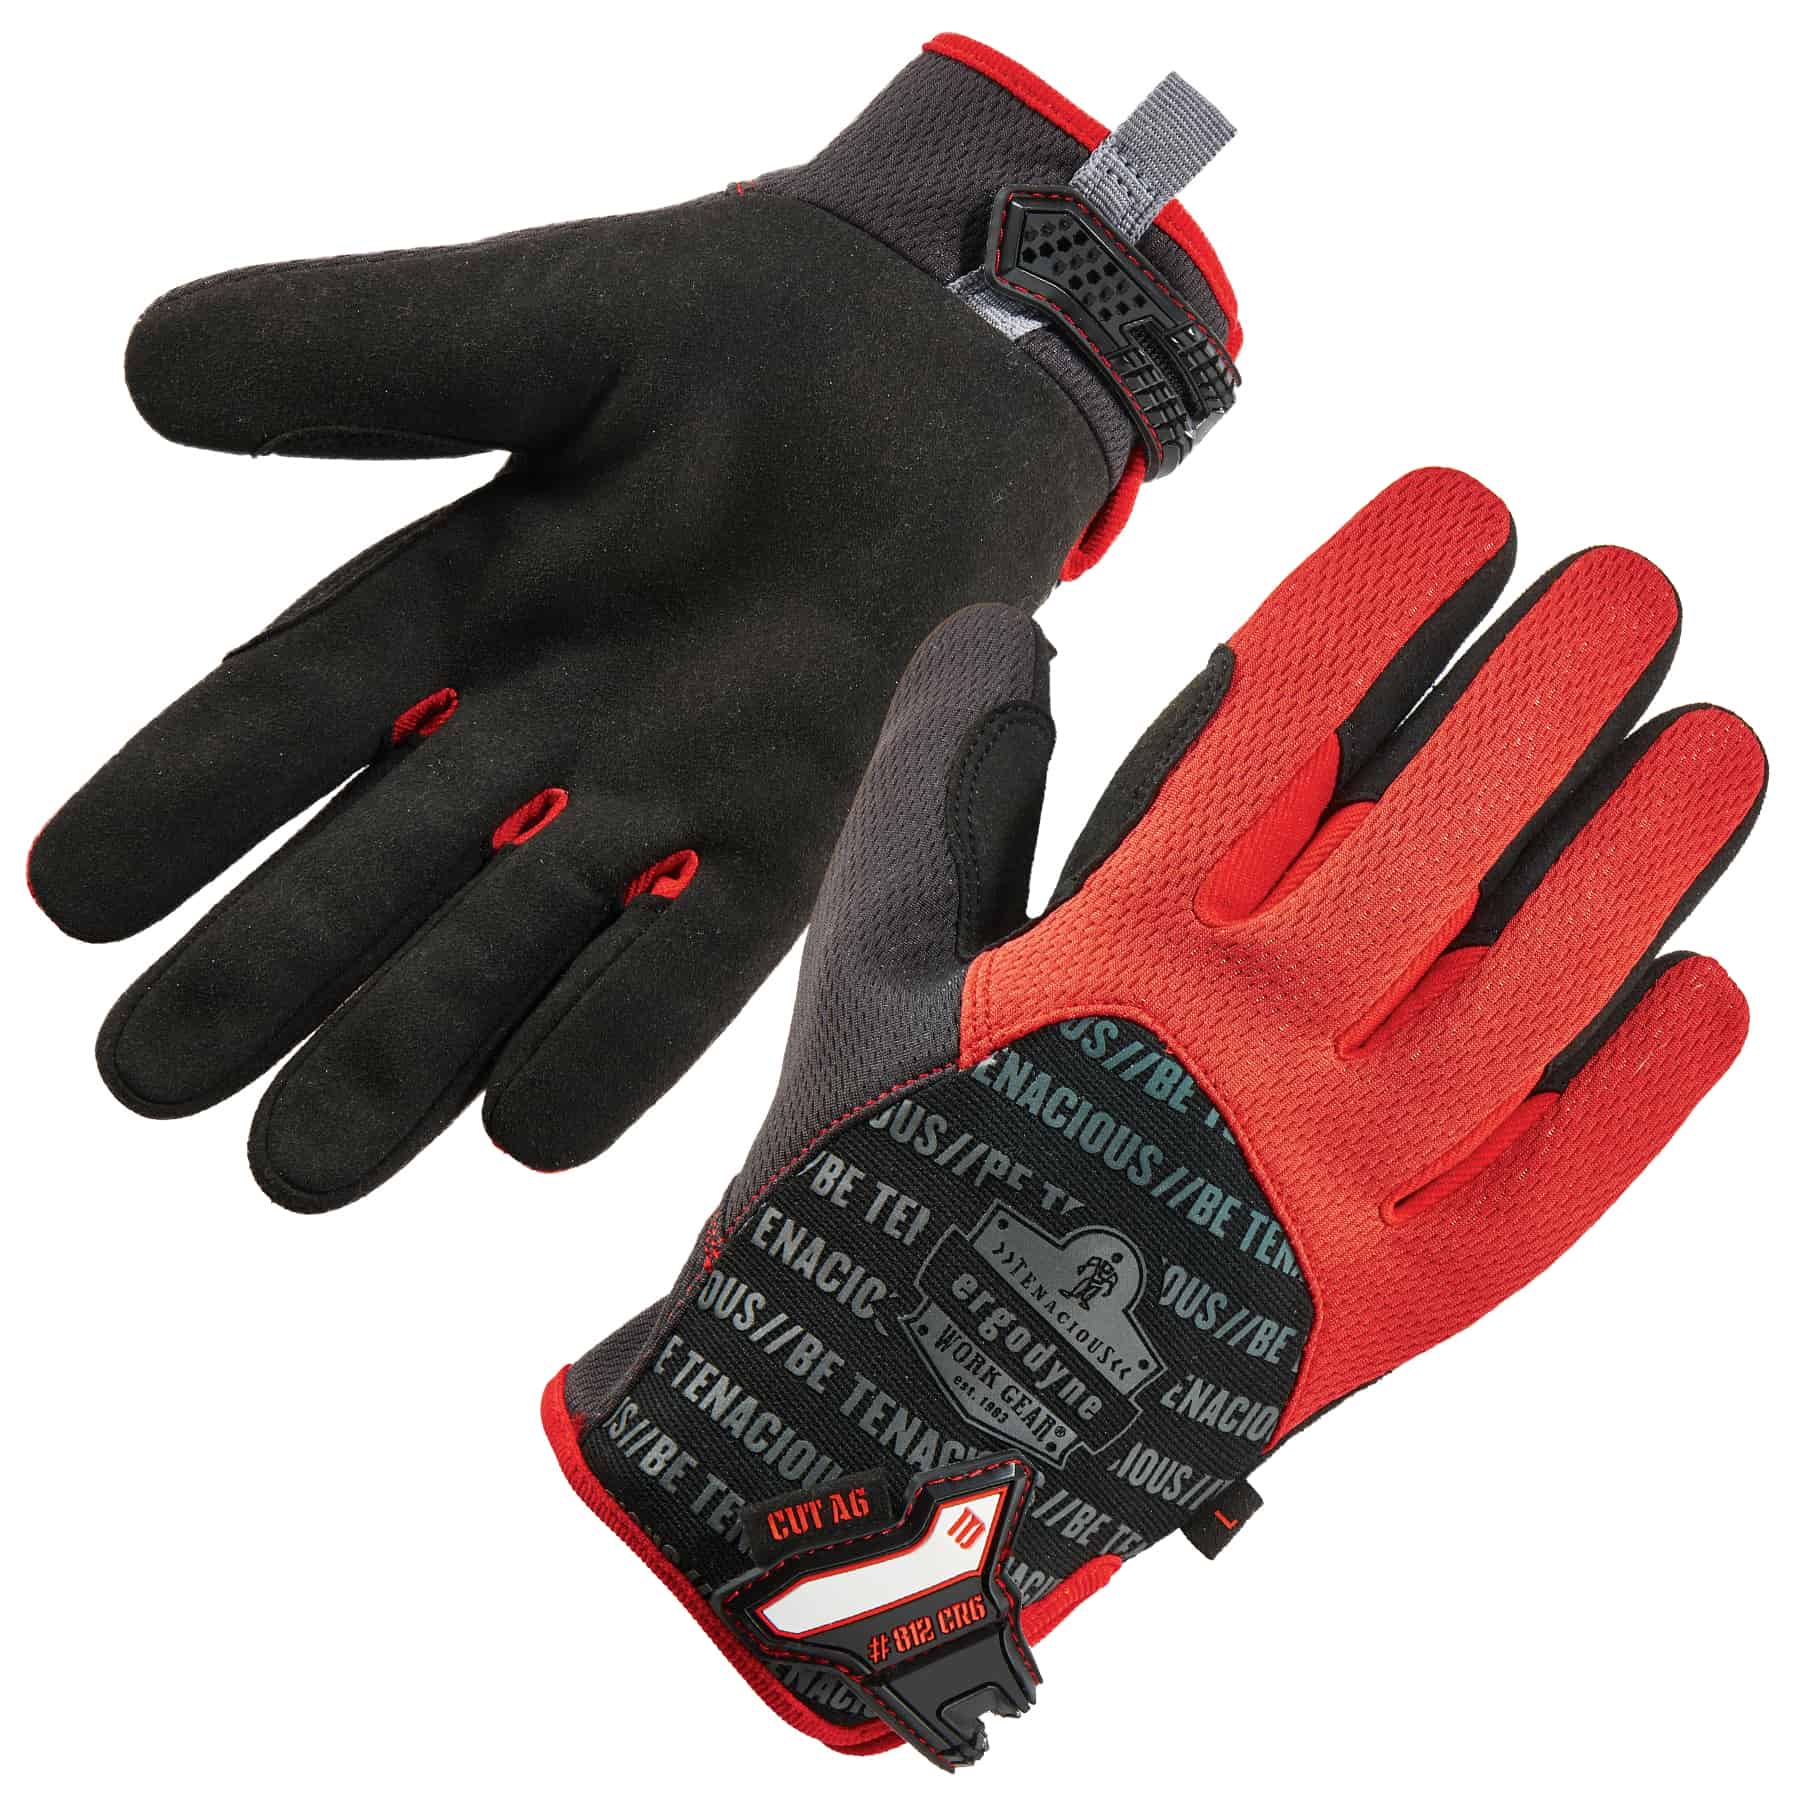 https://www.ergodyne.com/sites/default/files/product-images/17922-812cr6-utility-cut-resistance-gloves-paired.jpg